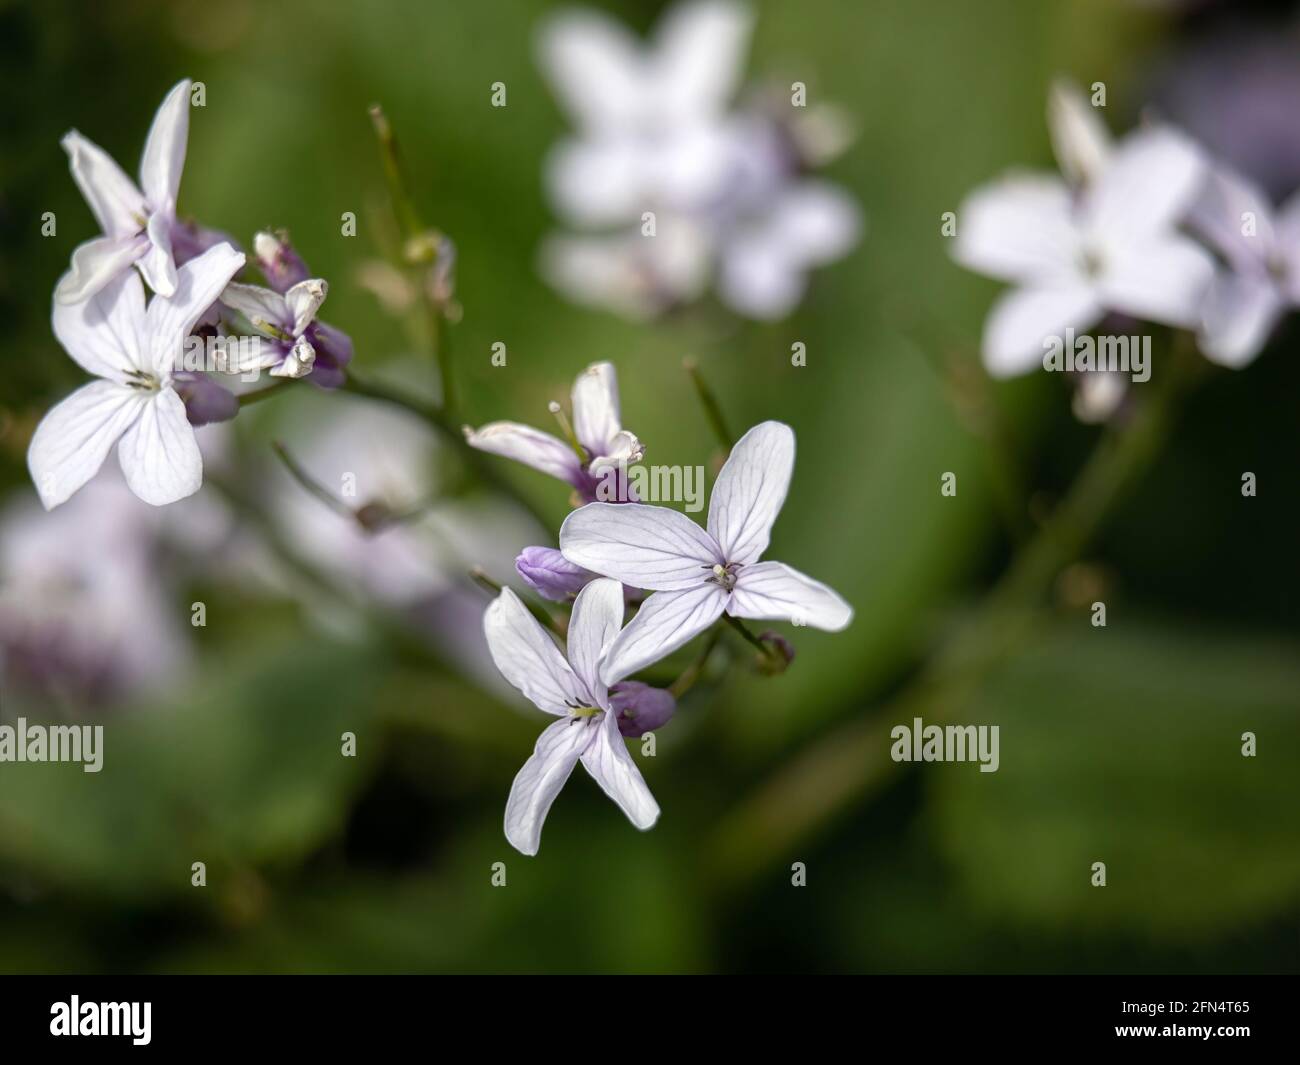 Closeup of flowers of perennial honesty, Lunaria rediviva, in the spring against a dark background Stock Photo